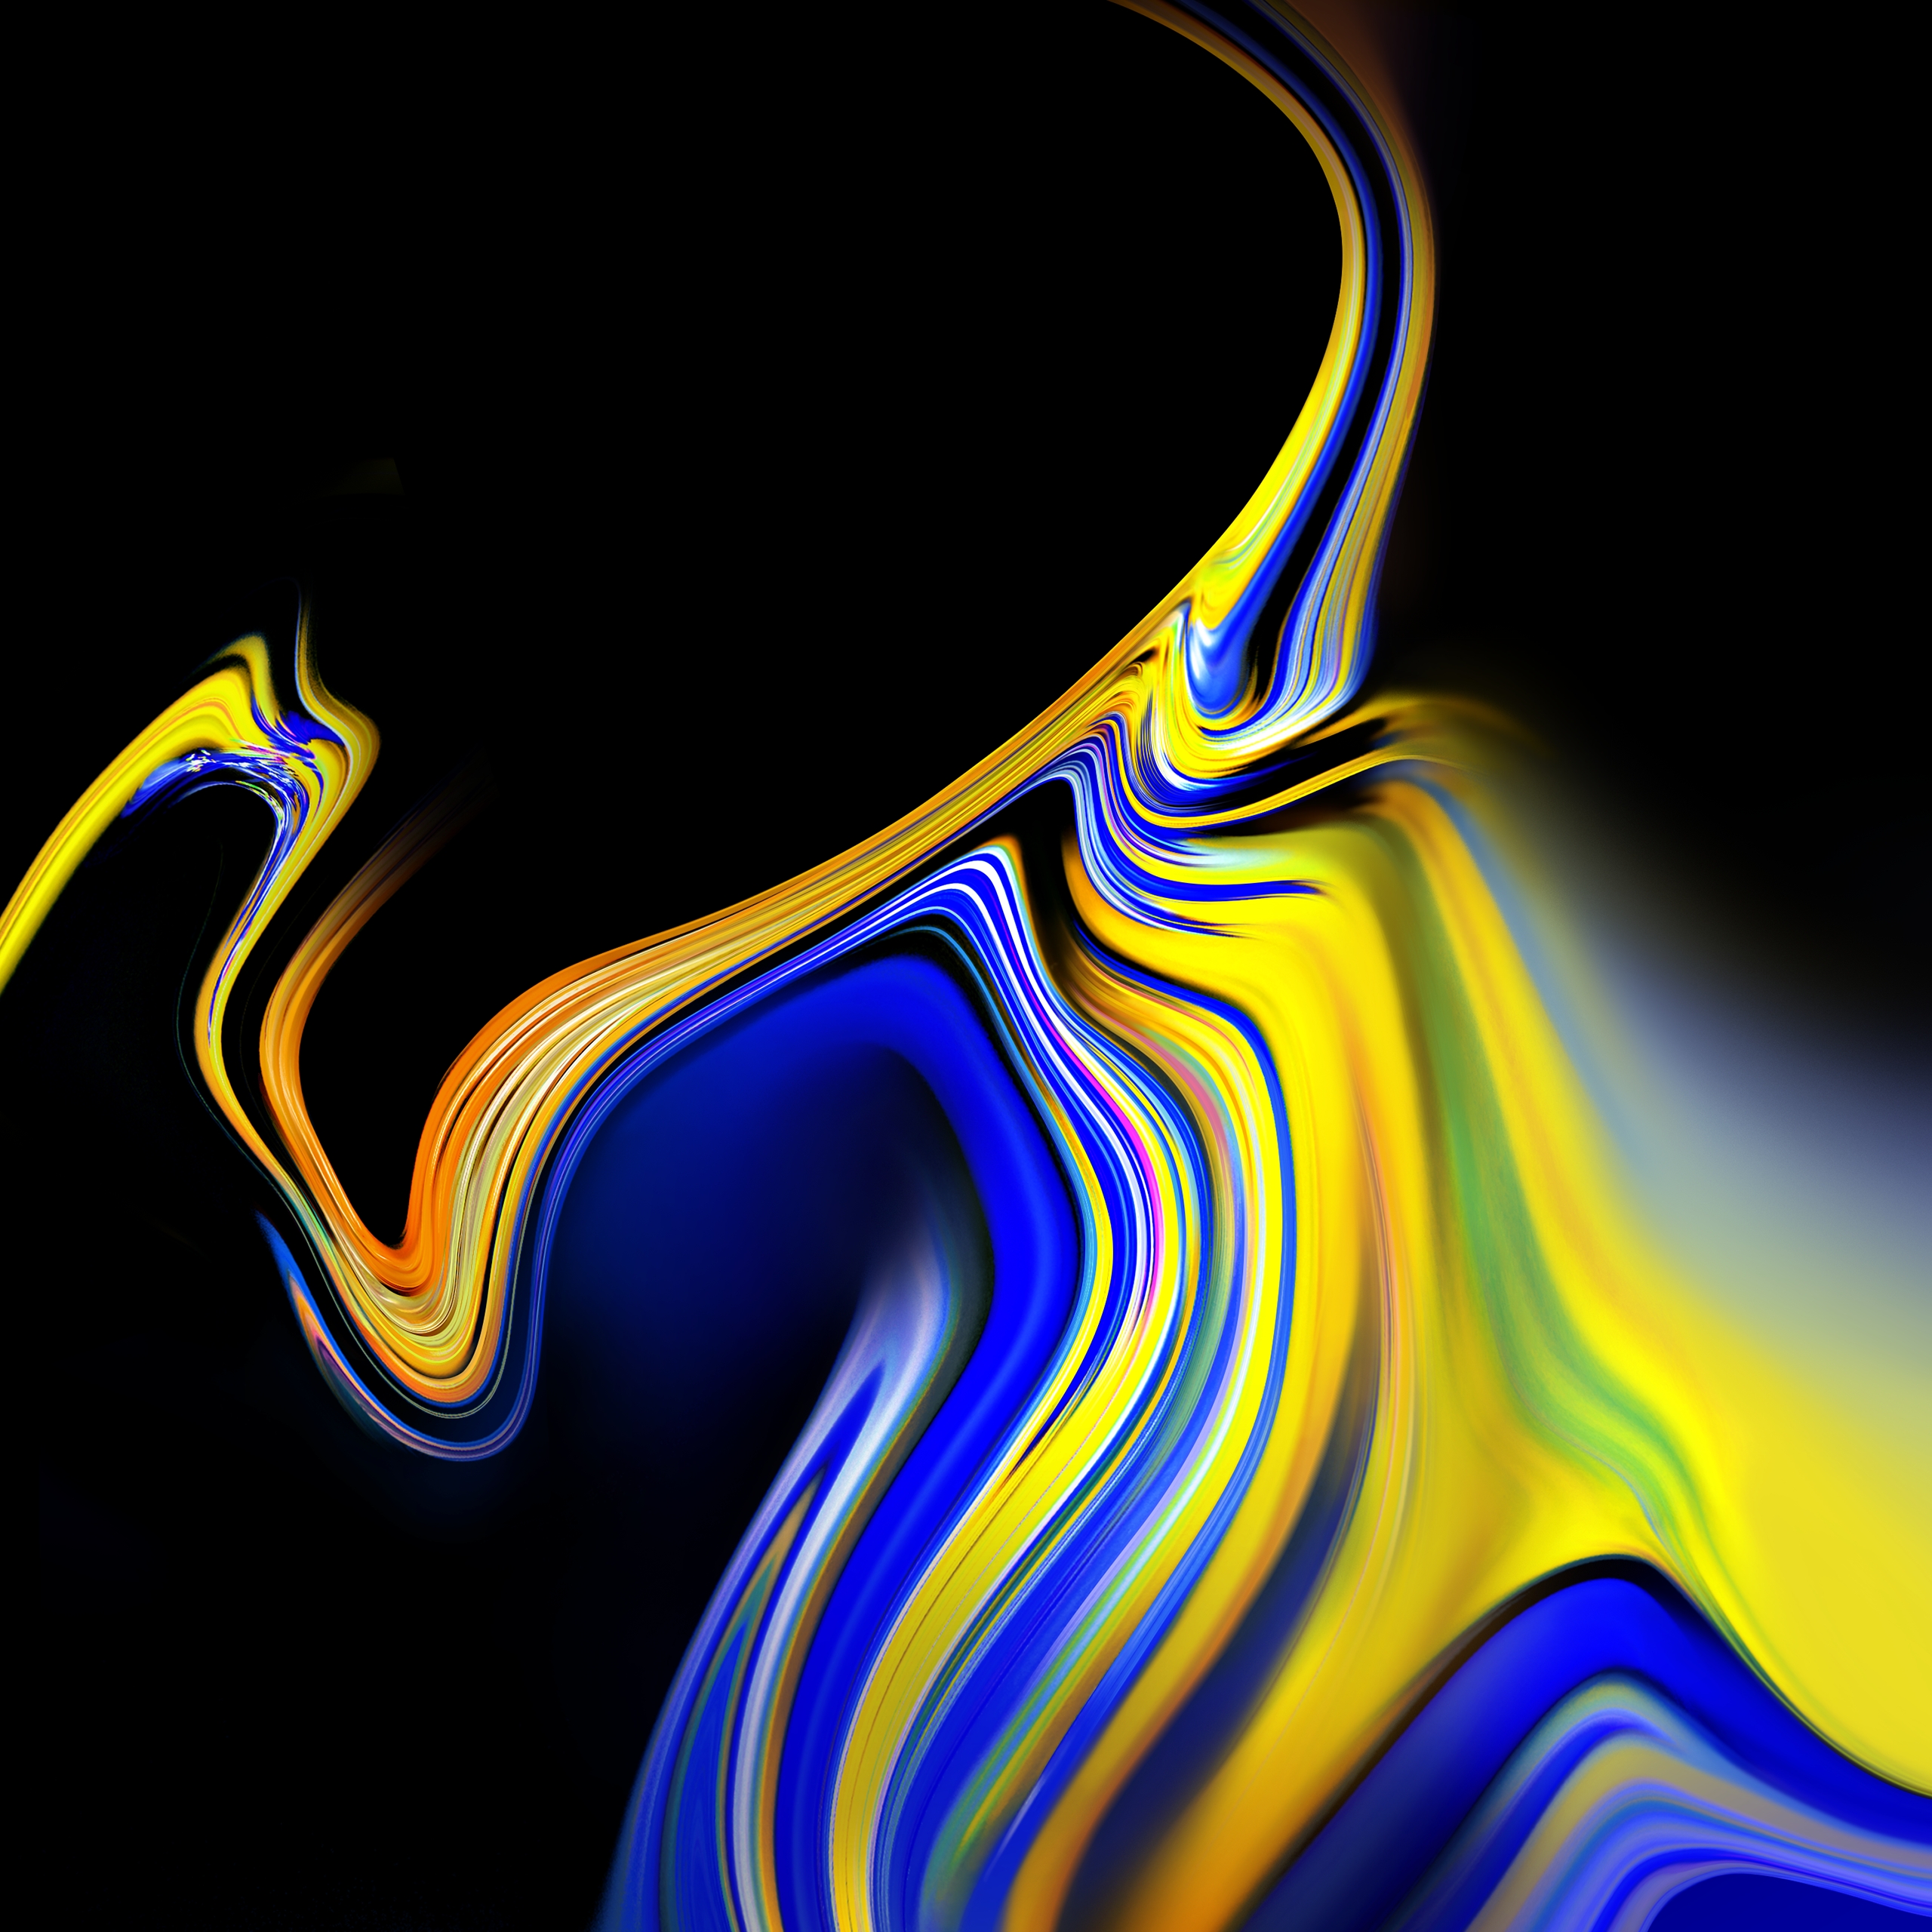 Galaxy Note 9 wallpapers